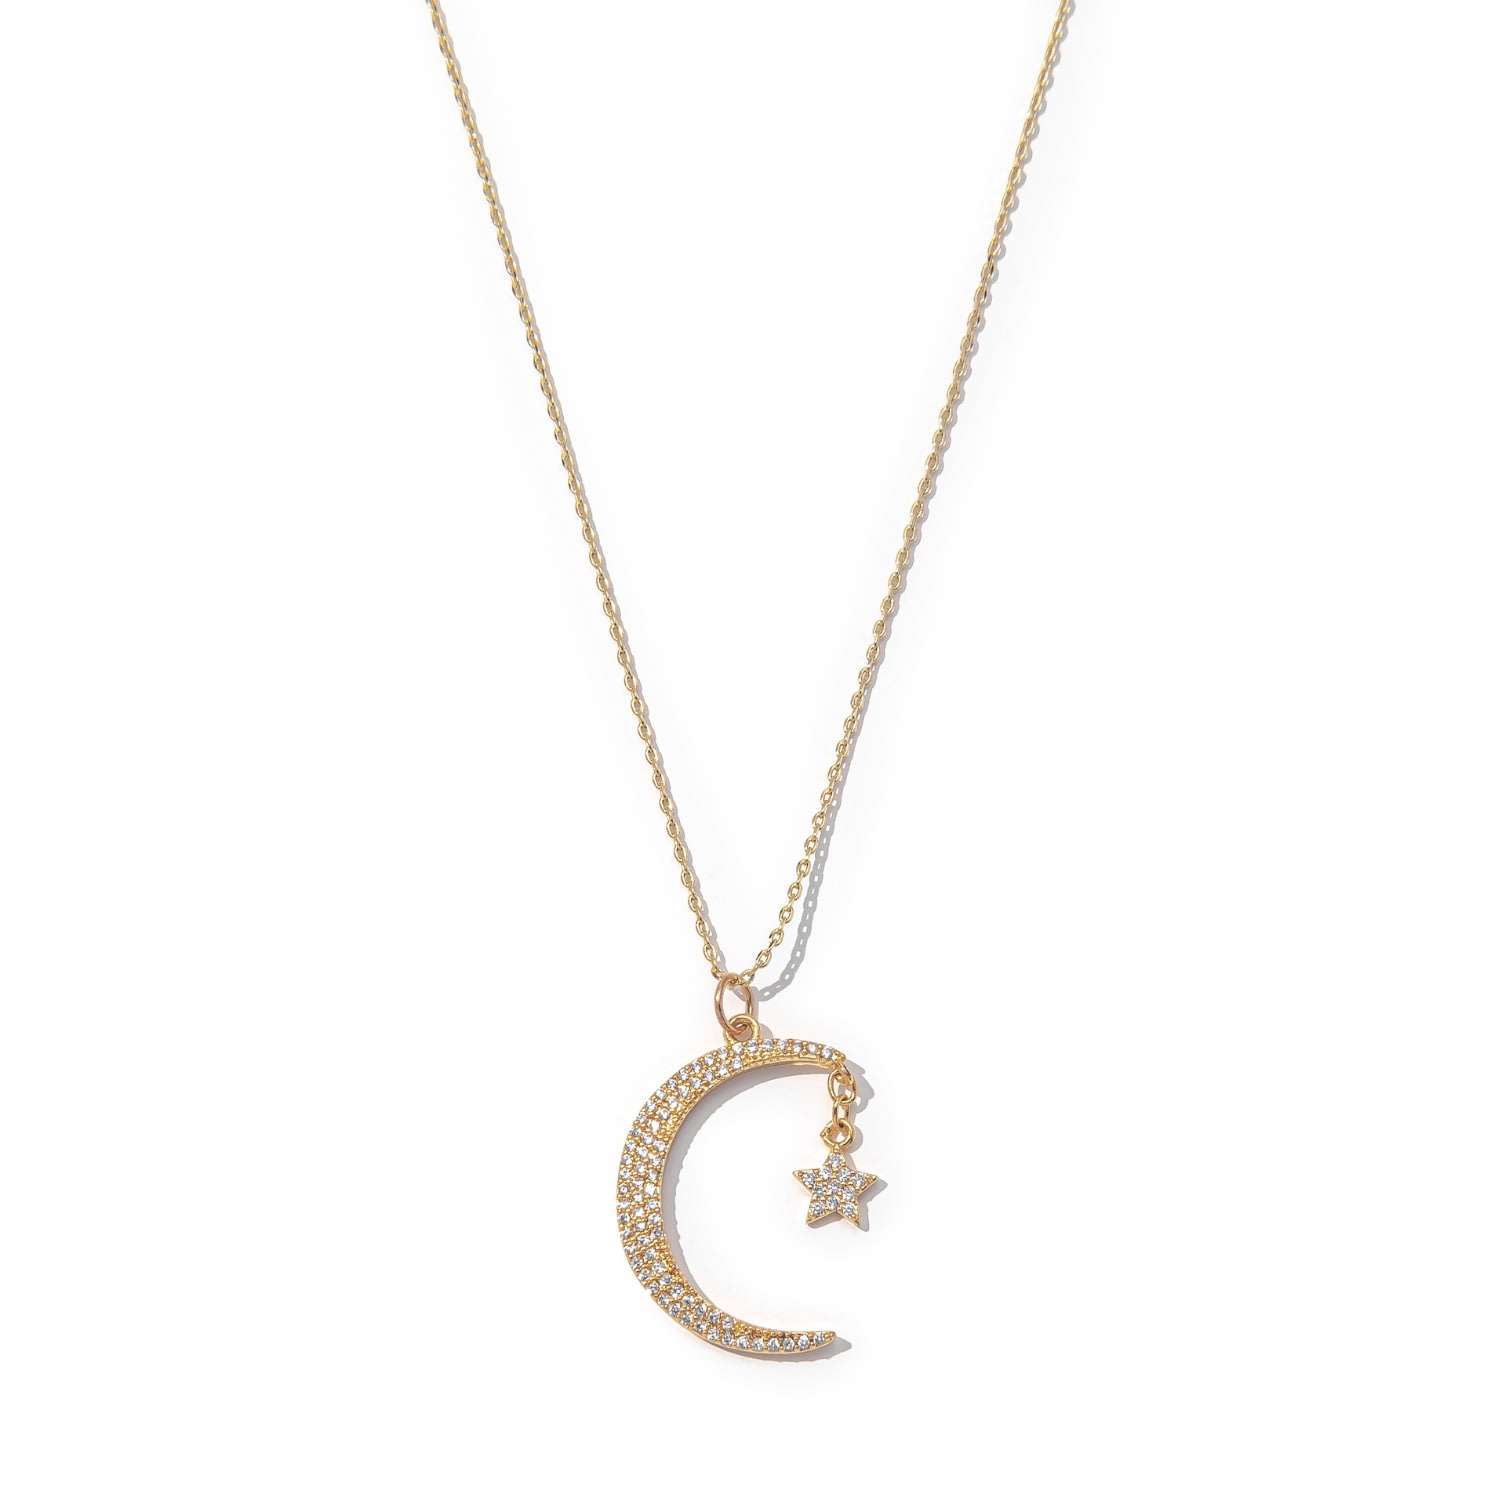 Women’s Gold Filled Moon Star Crystal Pendant Necklace The Essential Jewels